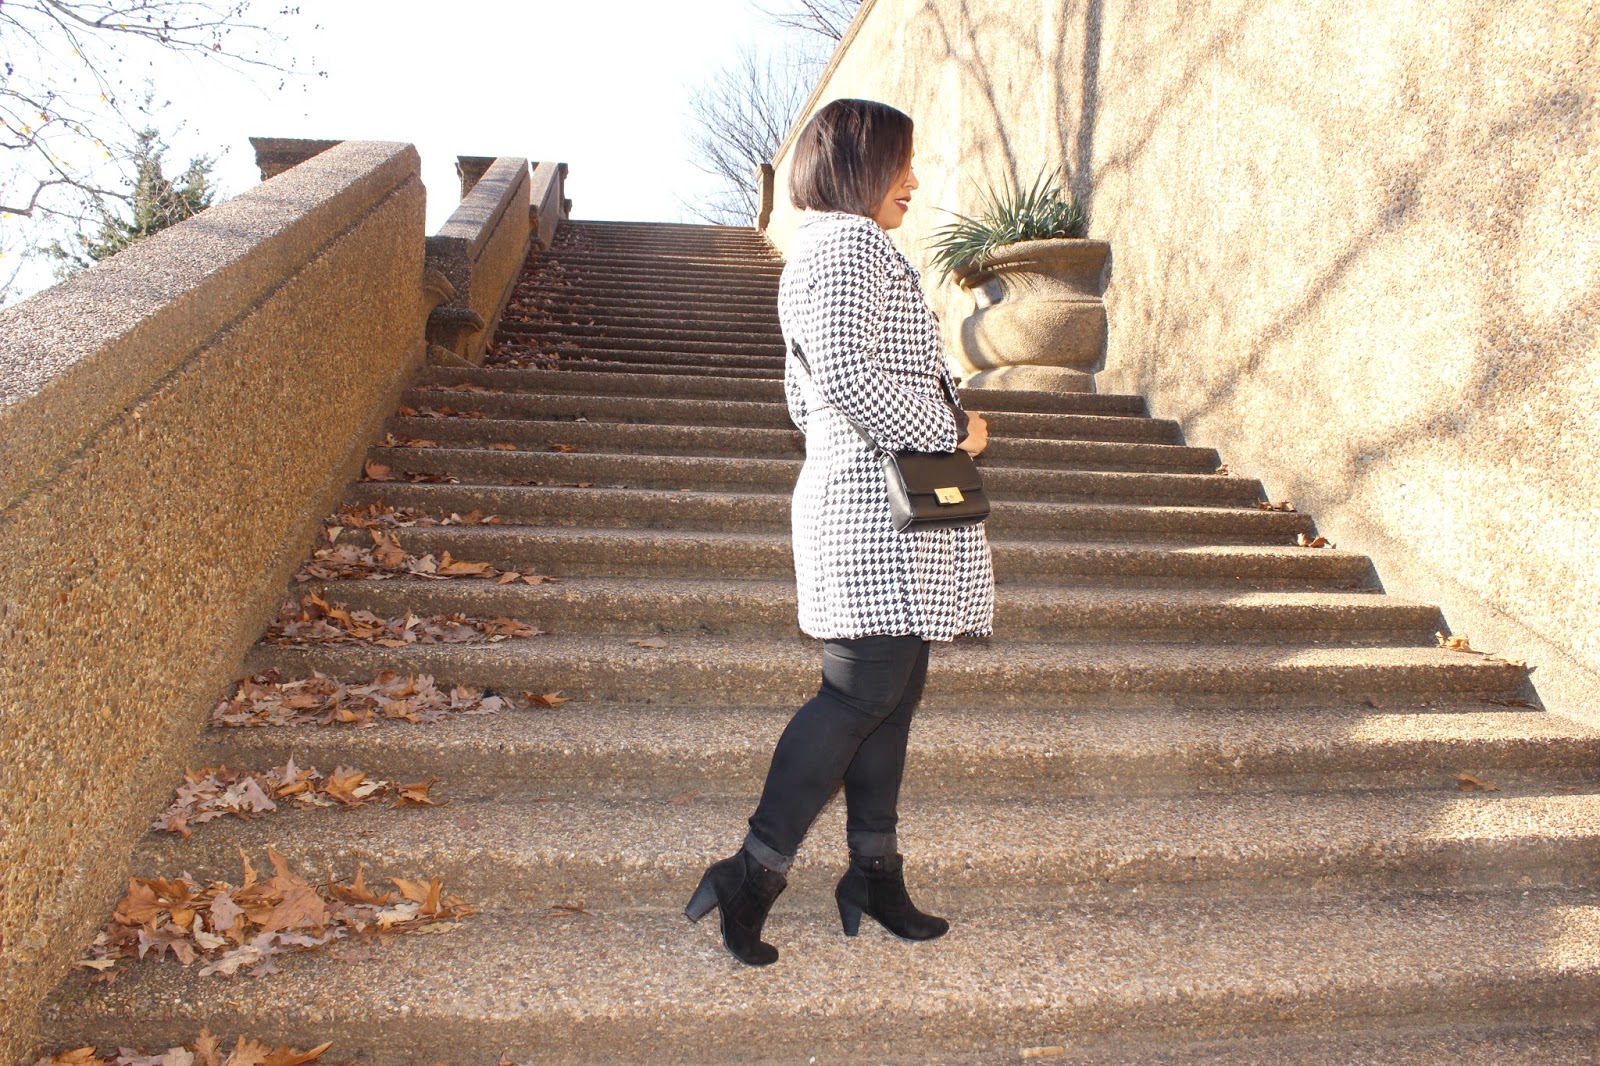 houndstooth print, houndstooth coat, winter coat, satchel purse, booties, fall boots, black and white, printed coat, black, style blog, blogger, fall outfit